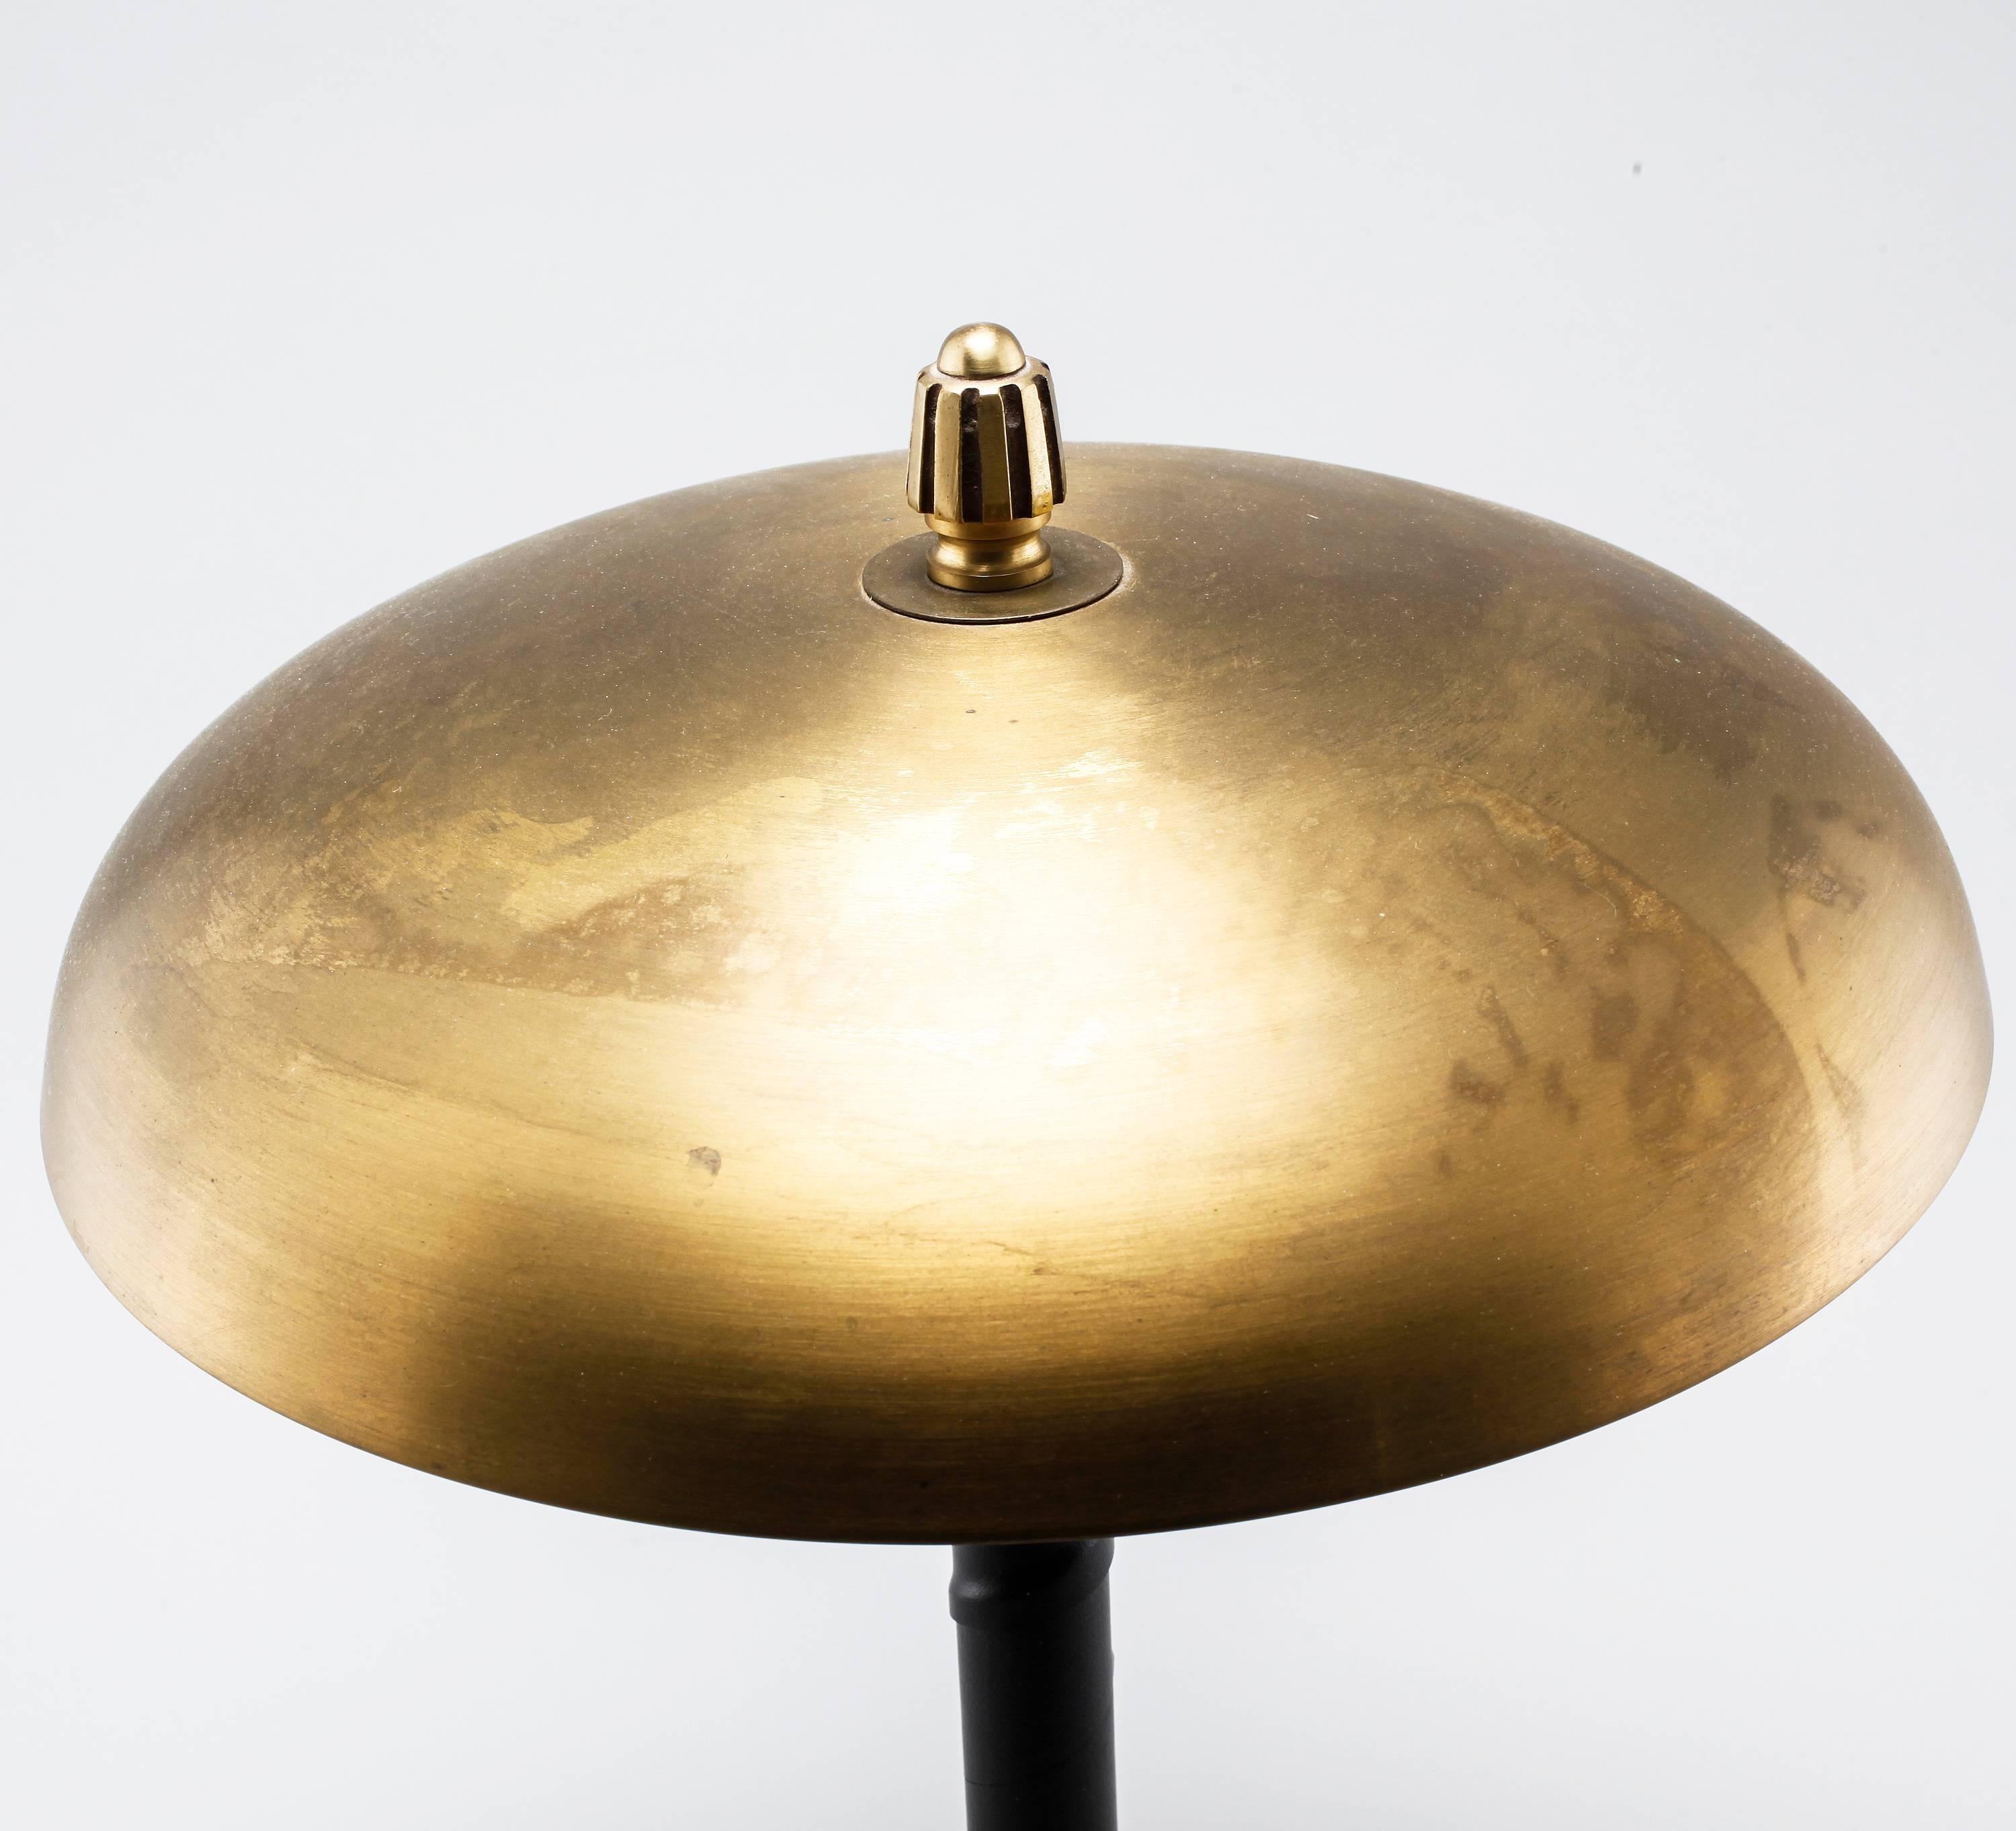 Swedish table lamp made in brass and black leather wrapped stem. Designed and manufactured by Einar Backstrom in 1940s.